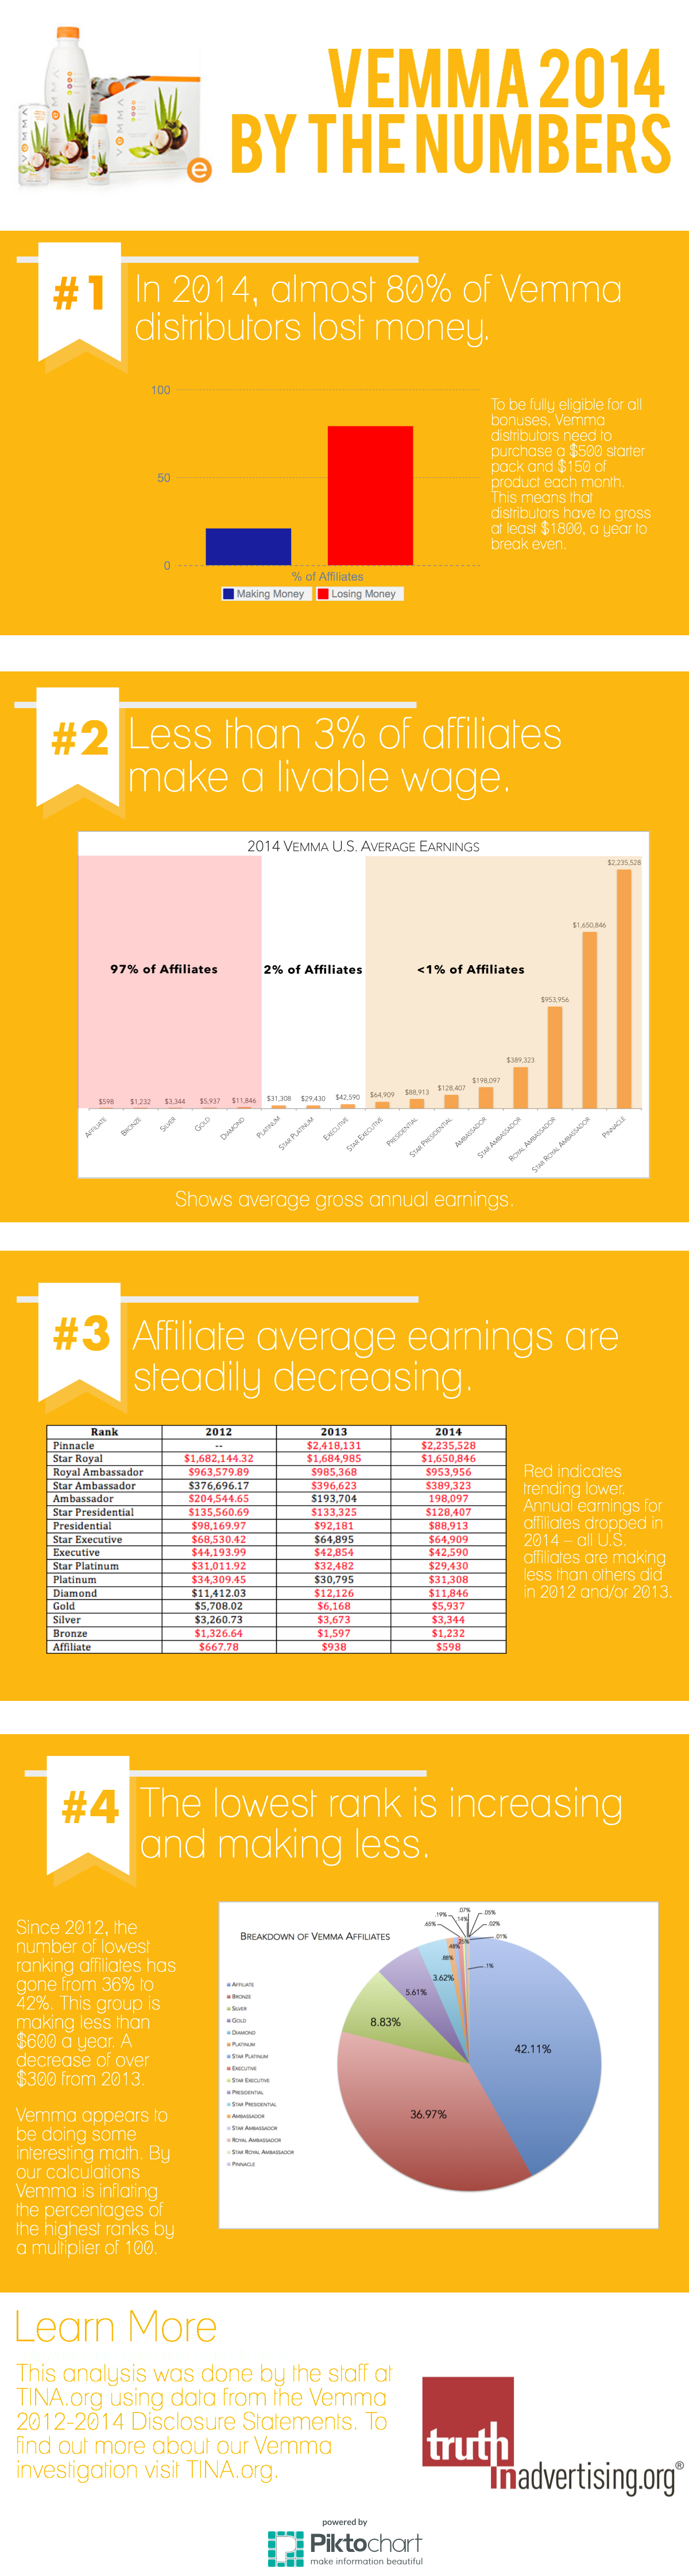 Vemma by the numbers-2